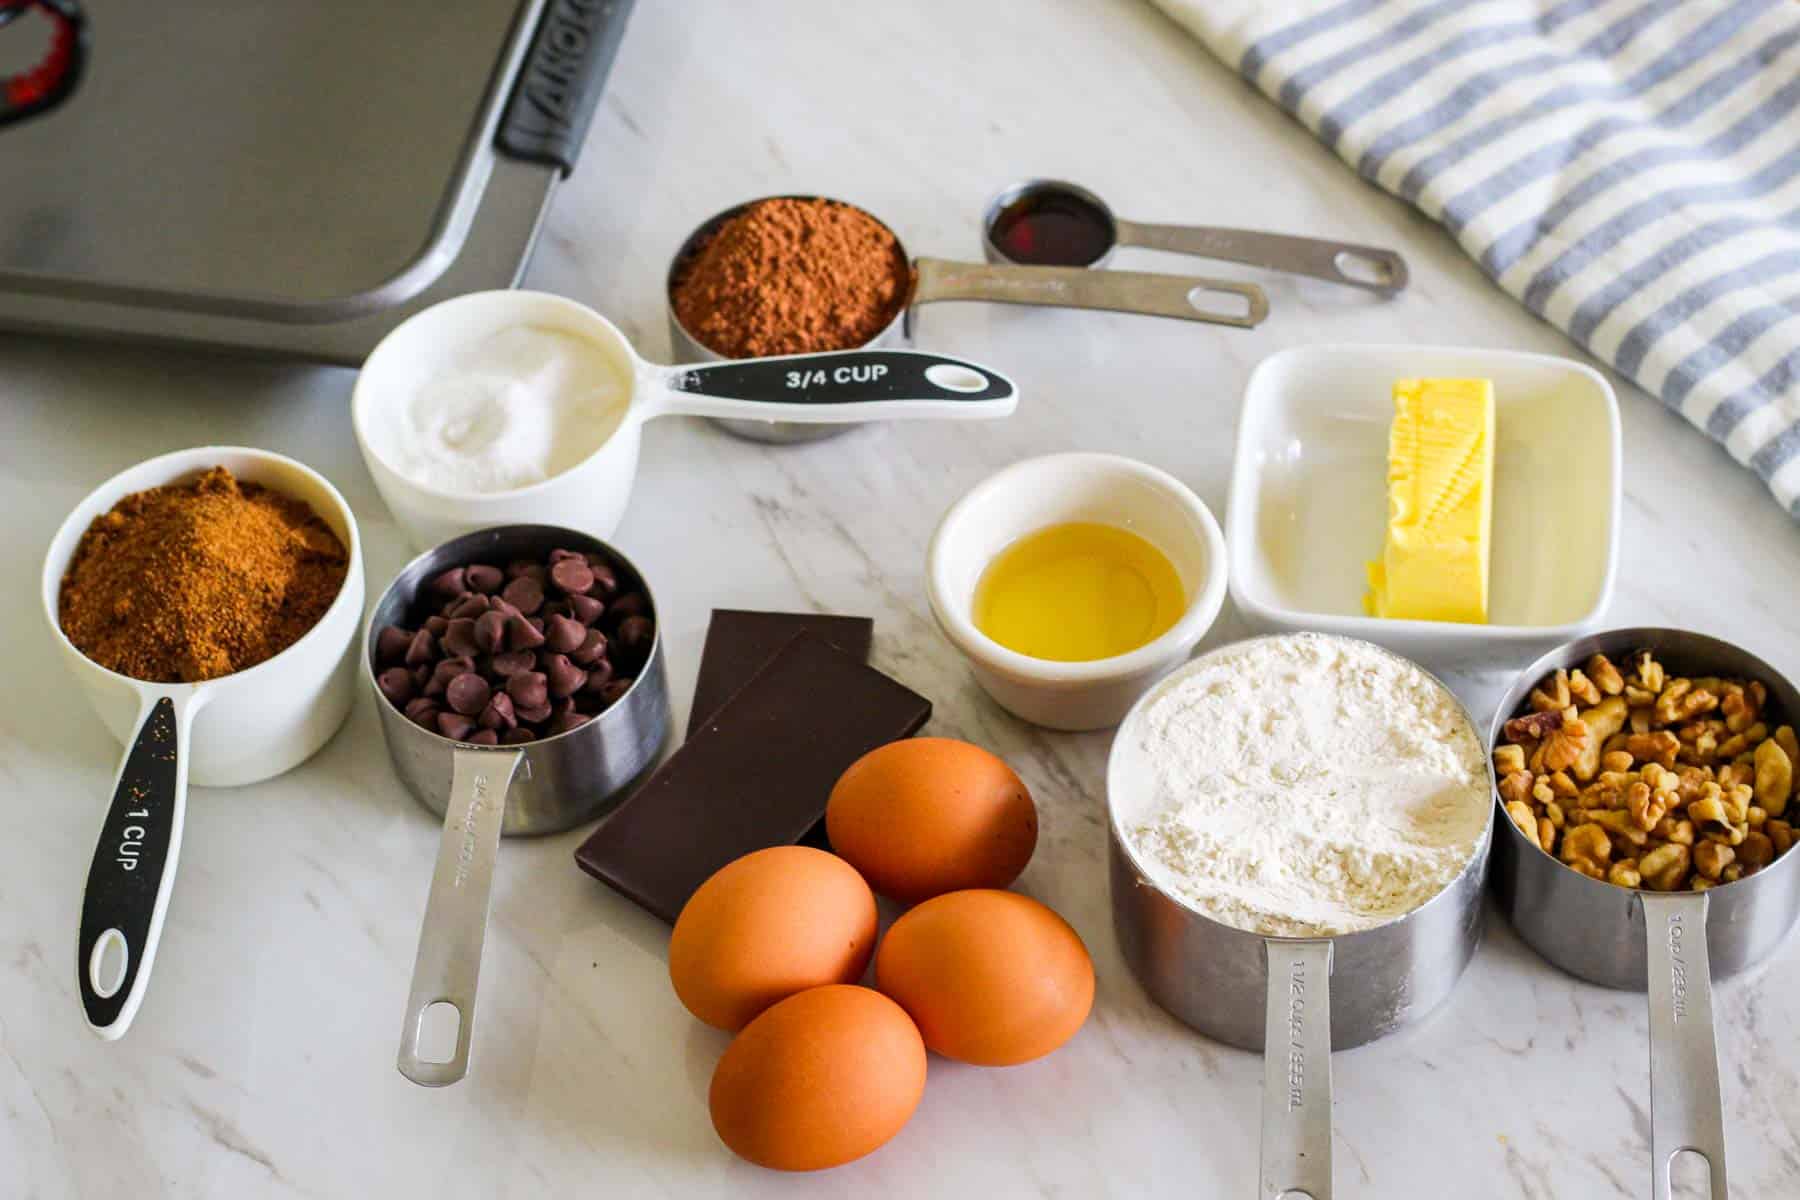 Ingredients for making triple chocolate brownies with walnuts: sugar, brown coconut sugar, cocoa, vanilla, avocado oil, butter, chocolate chips, chocolate bars, eggs, AP flour, chopped walnuts.